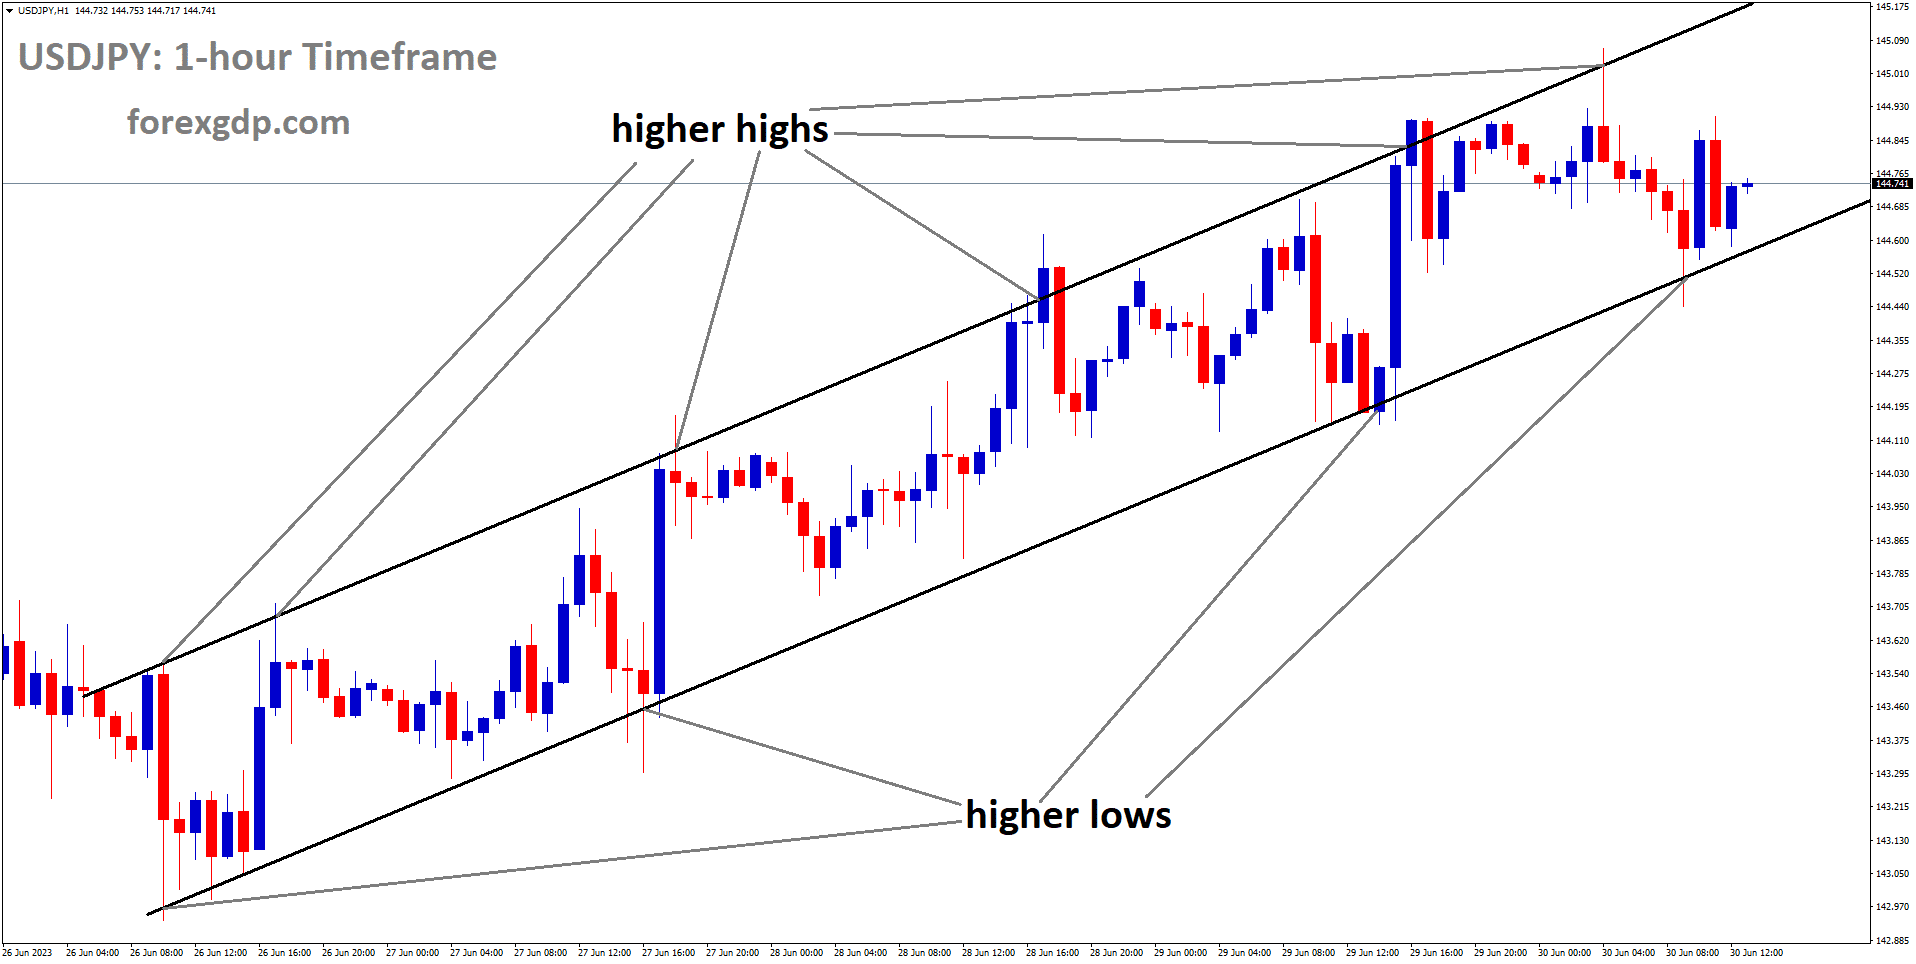 USDJPY is moving an Ascending channel and the market has reached higher low area of the channel.